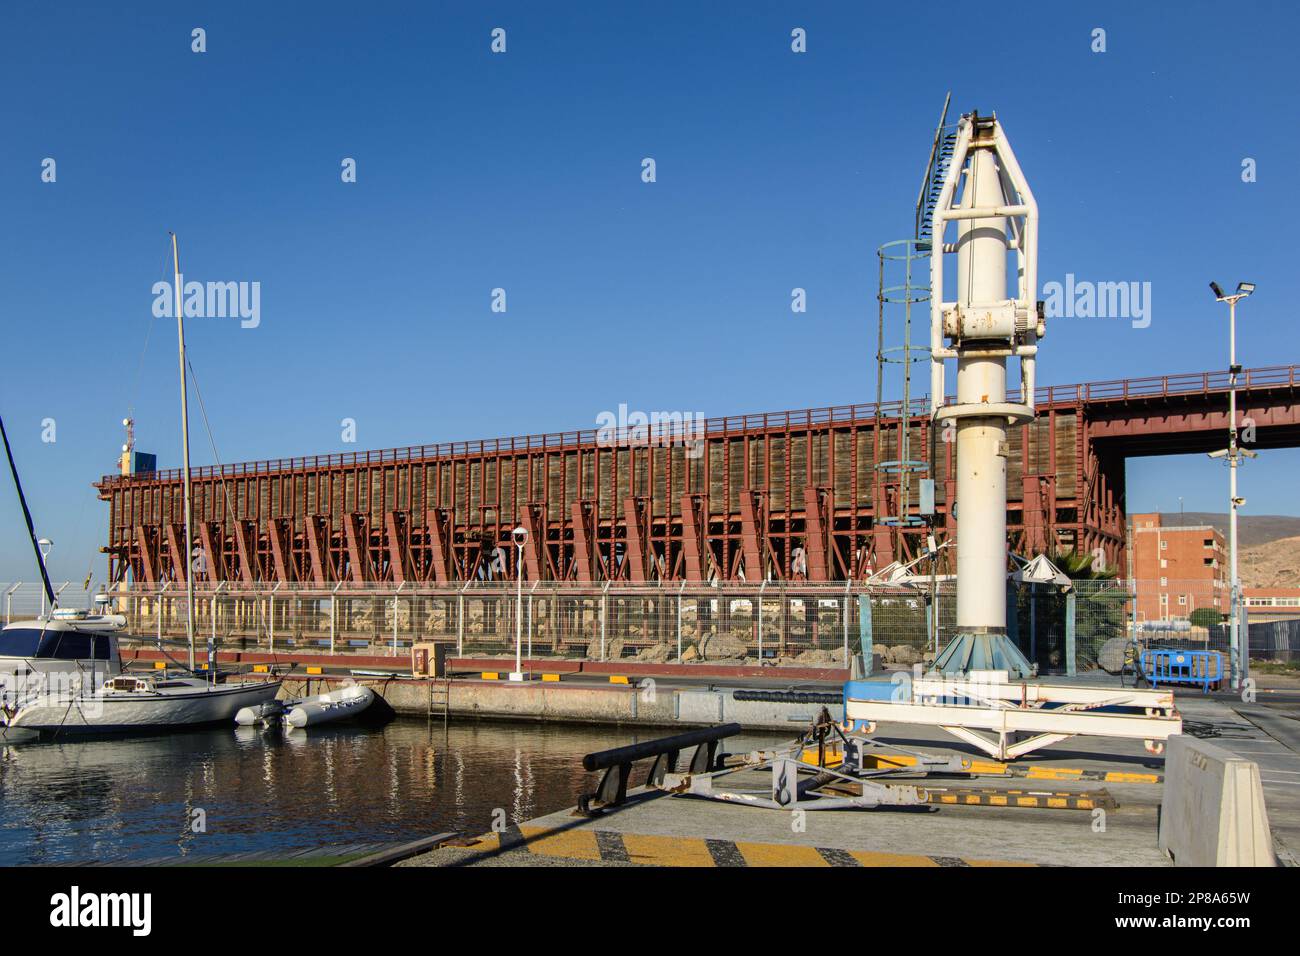 El Cable Inglés, Almería city, Spain. Terminus of railway used to transport minerals from mines in Granada. Built in 1904 it was in use until 1973. Stock Photo